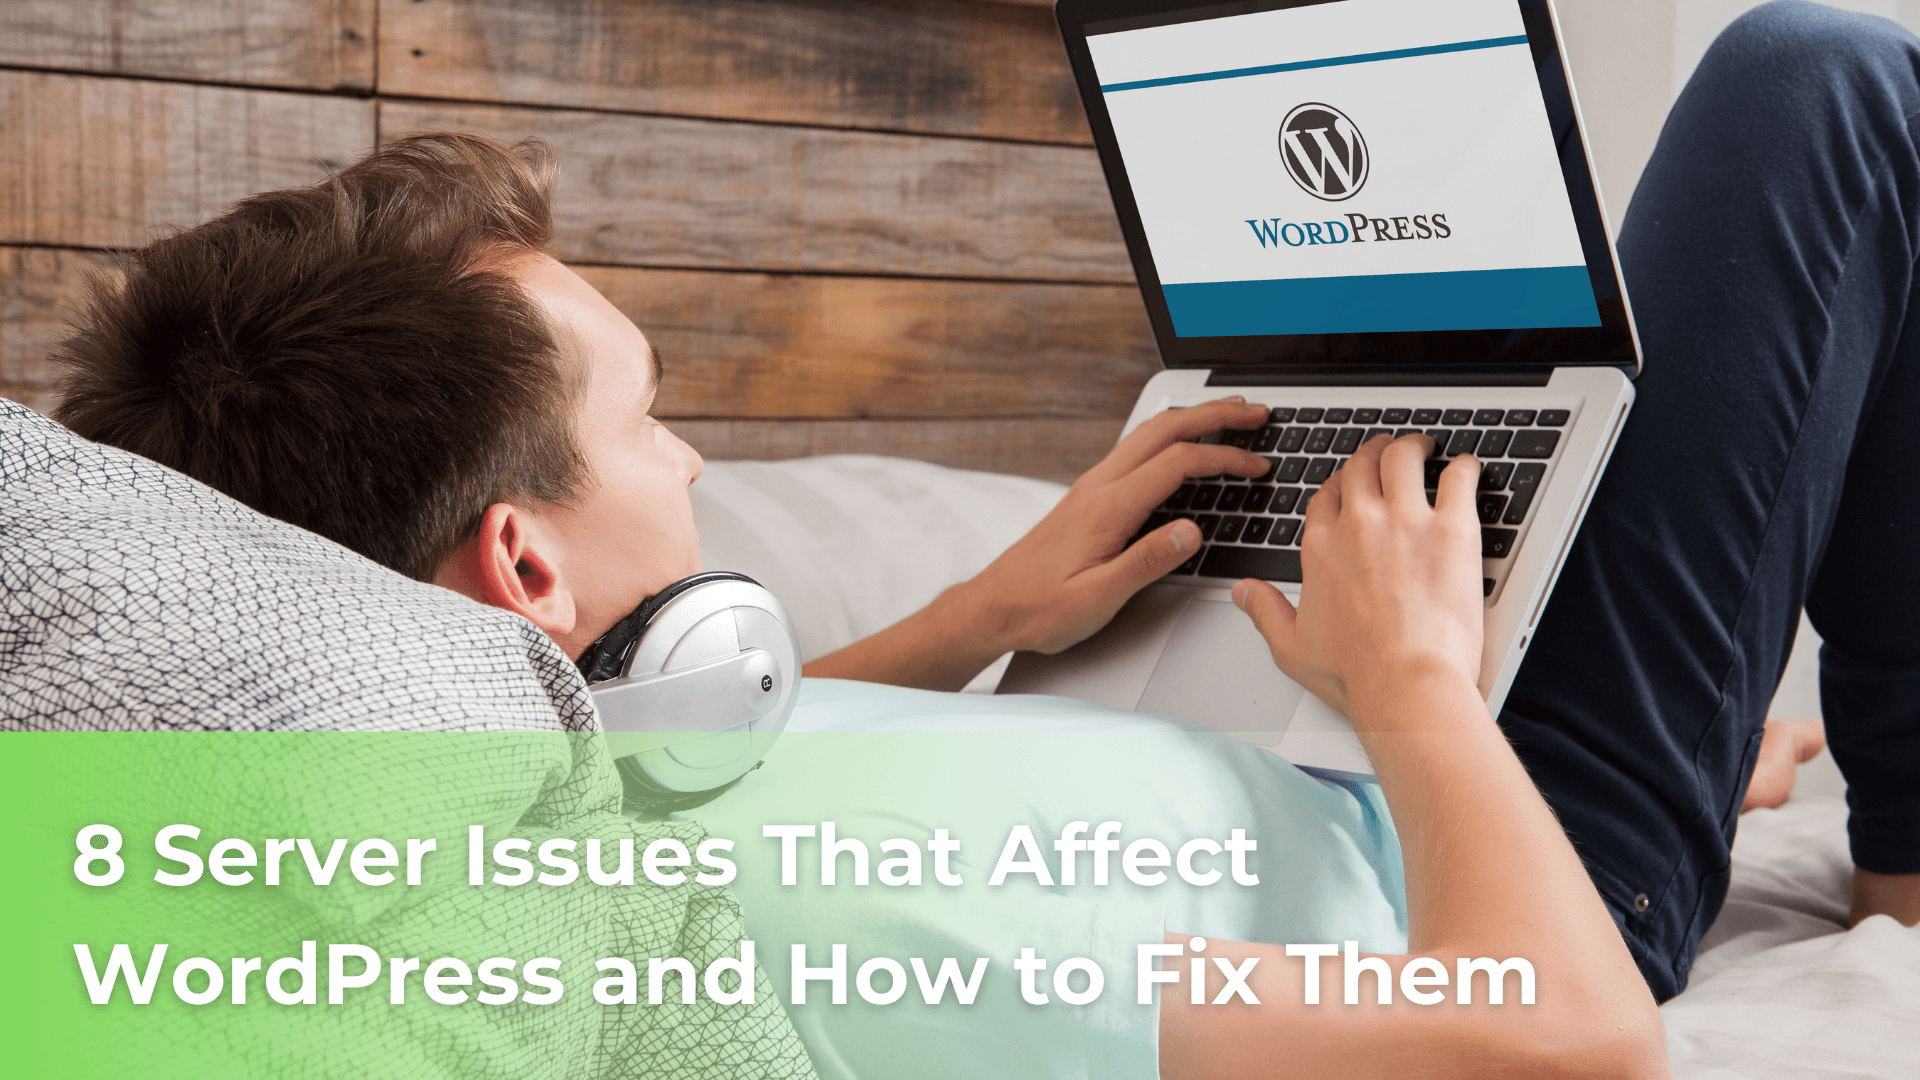 ScalaHosting - 8 Server Issues That Affect WordPress and How to Fix Them (1)